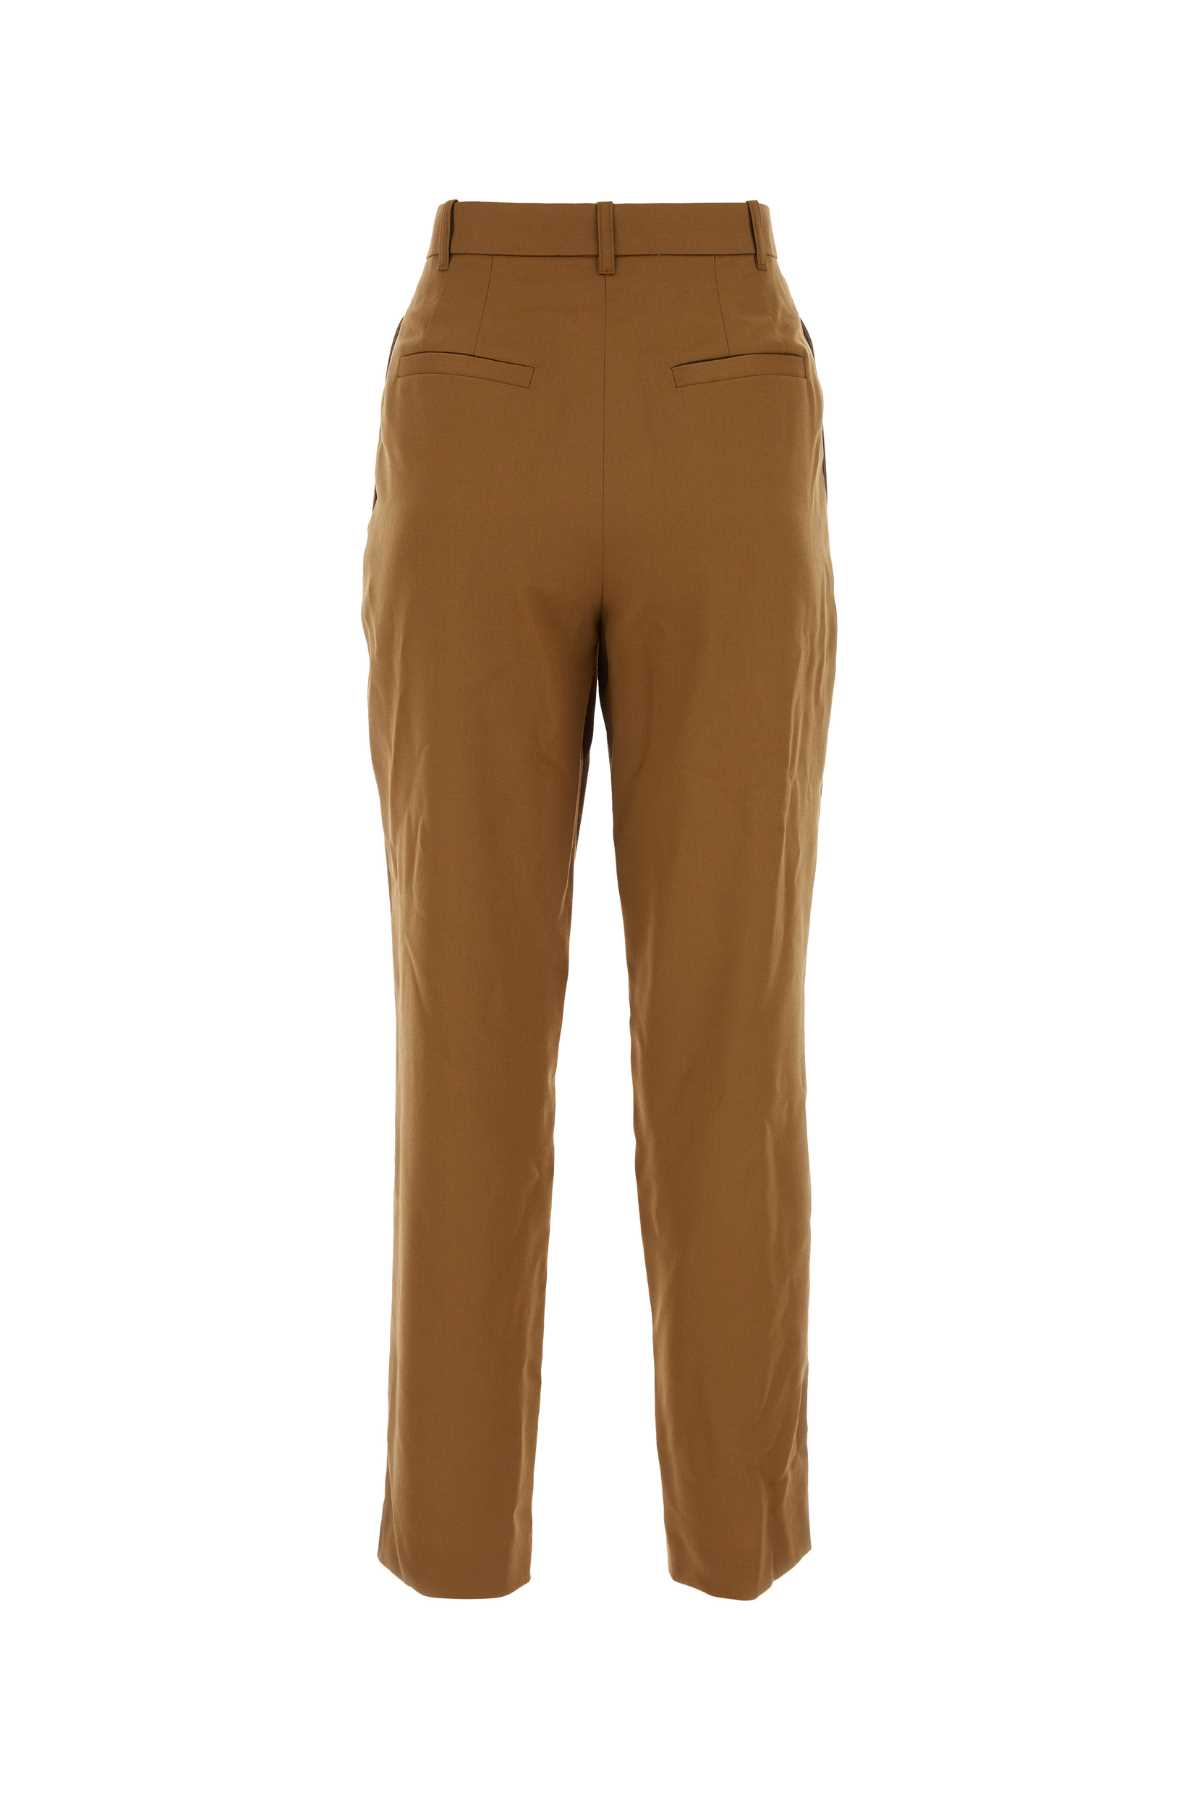 Apc Camel Wool Trouser In Icybrown